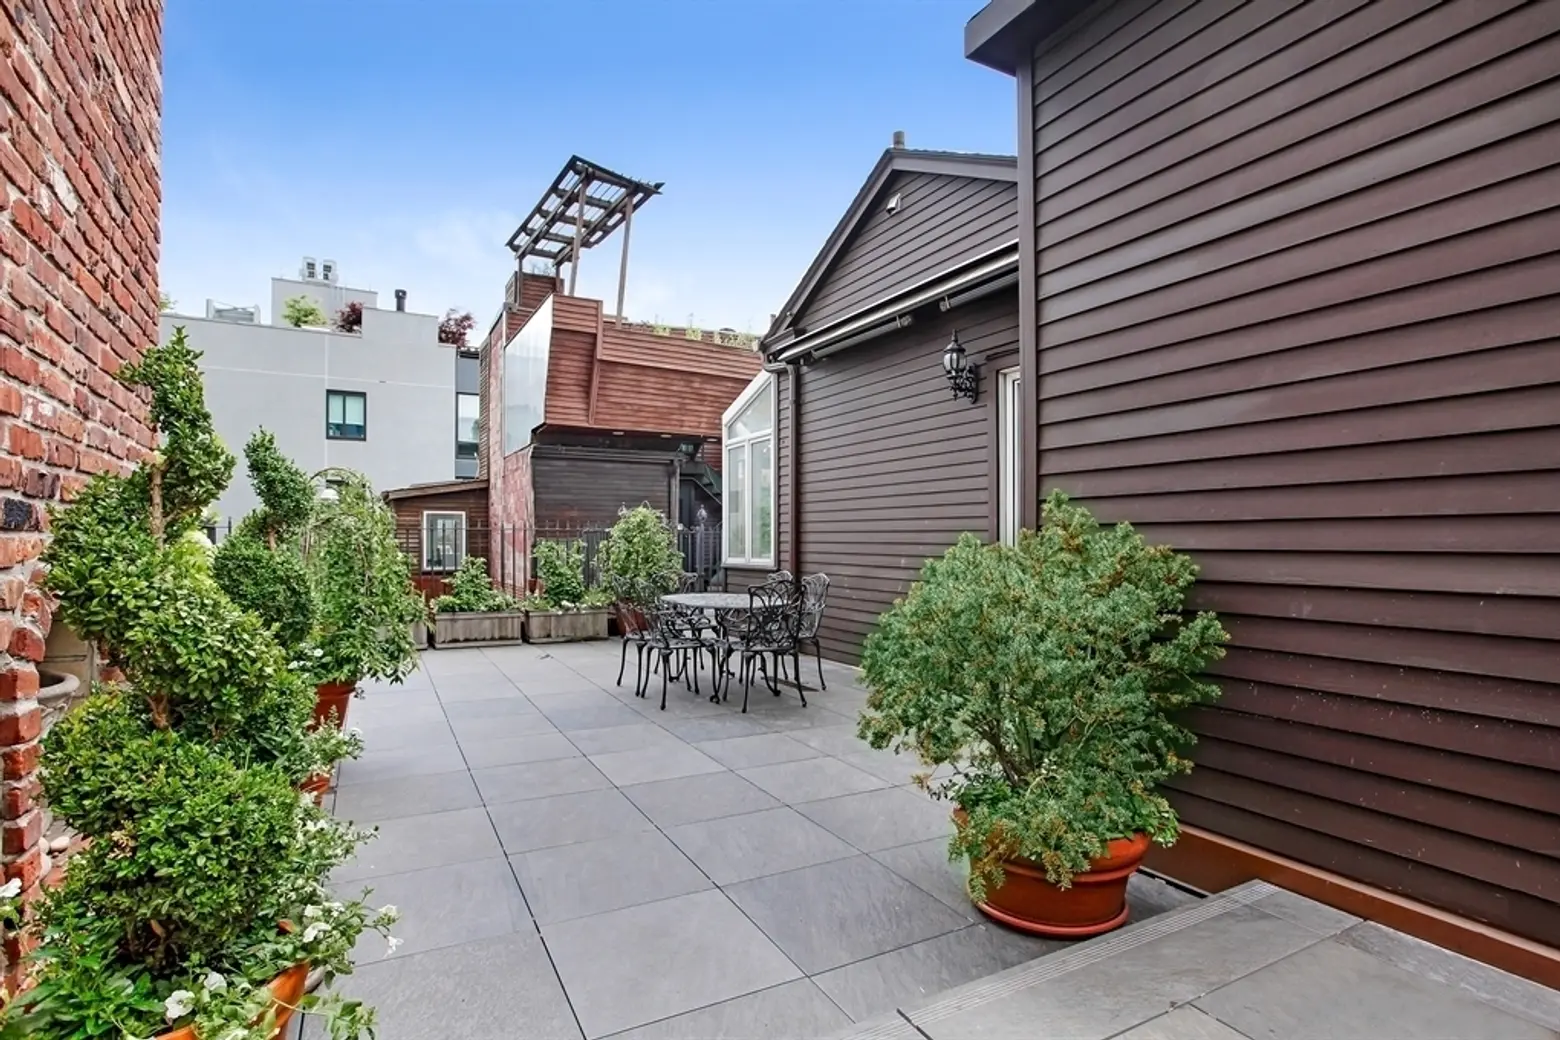 203 East 13th Street, 7 Harrison Street, penthouse, rooftop garden, cool listings, manhattan real estate, tribeca, east village, high and low, rooftop cabin